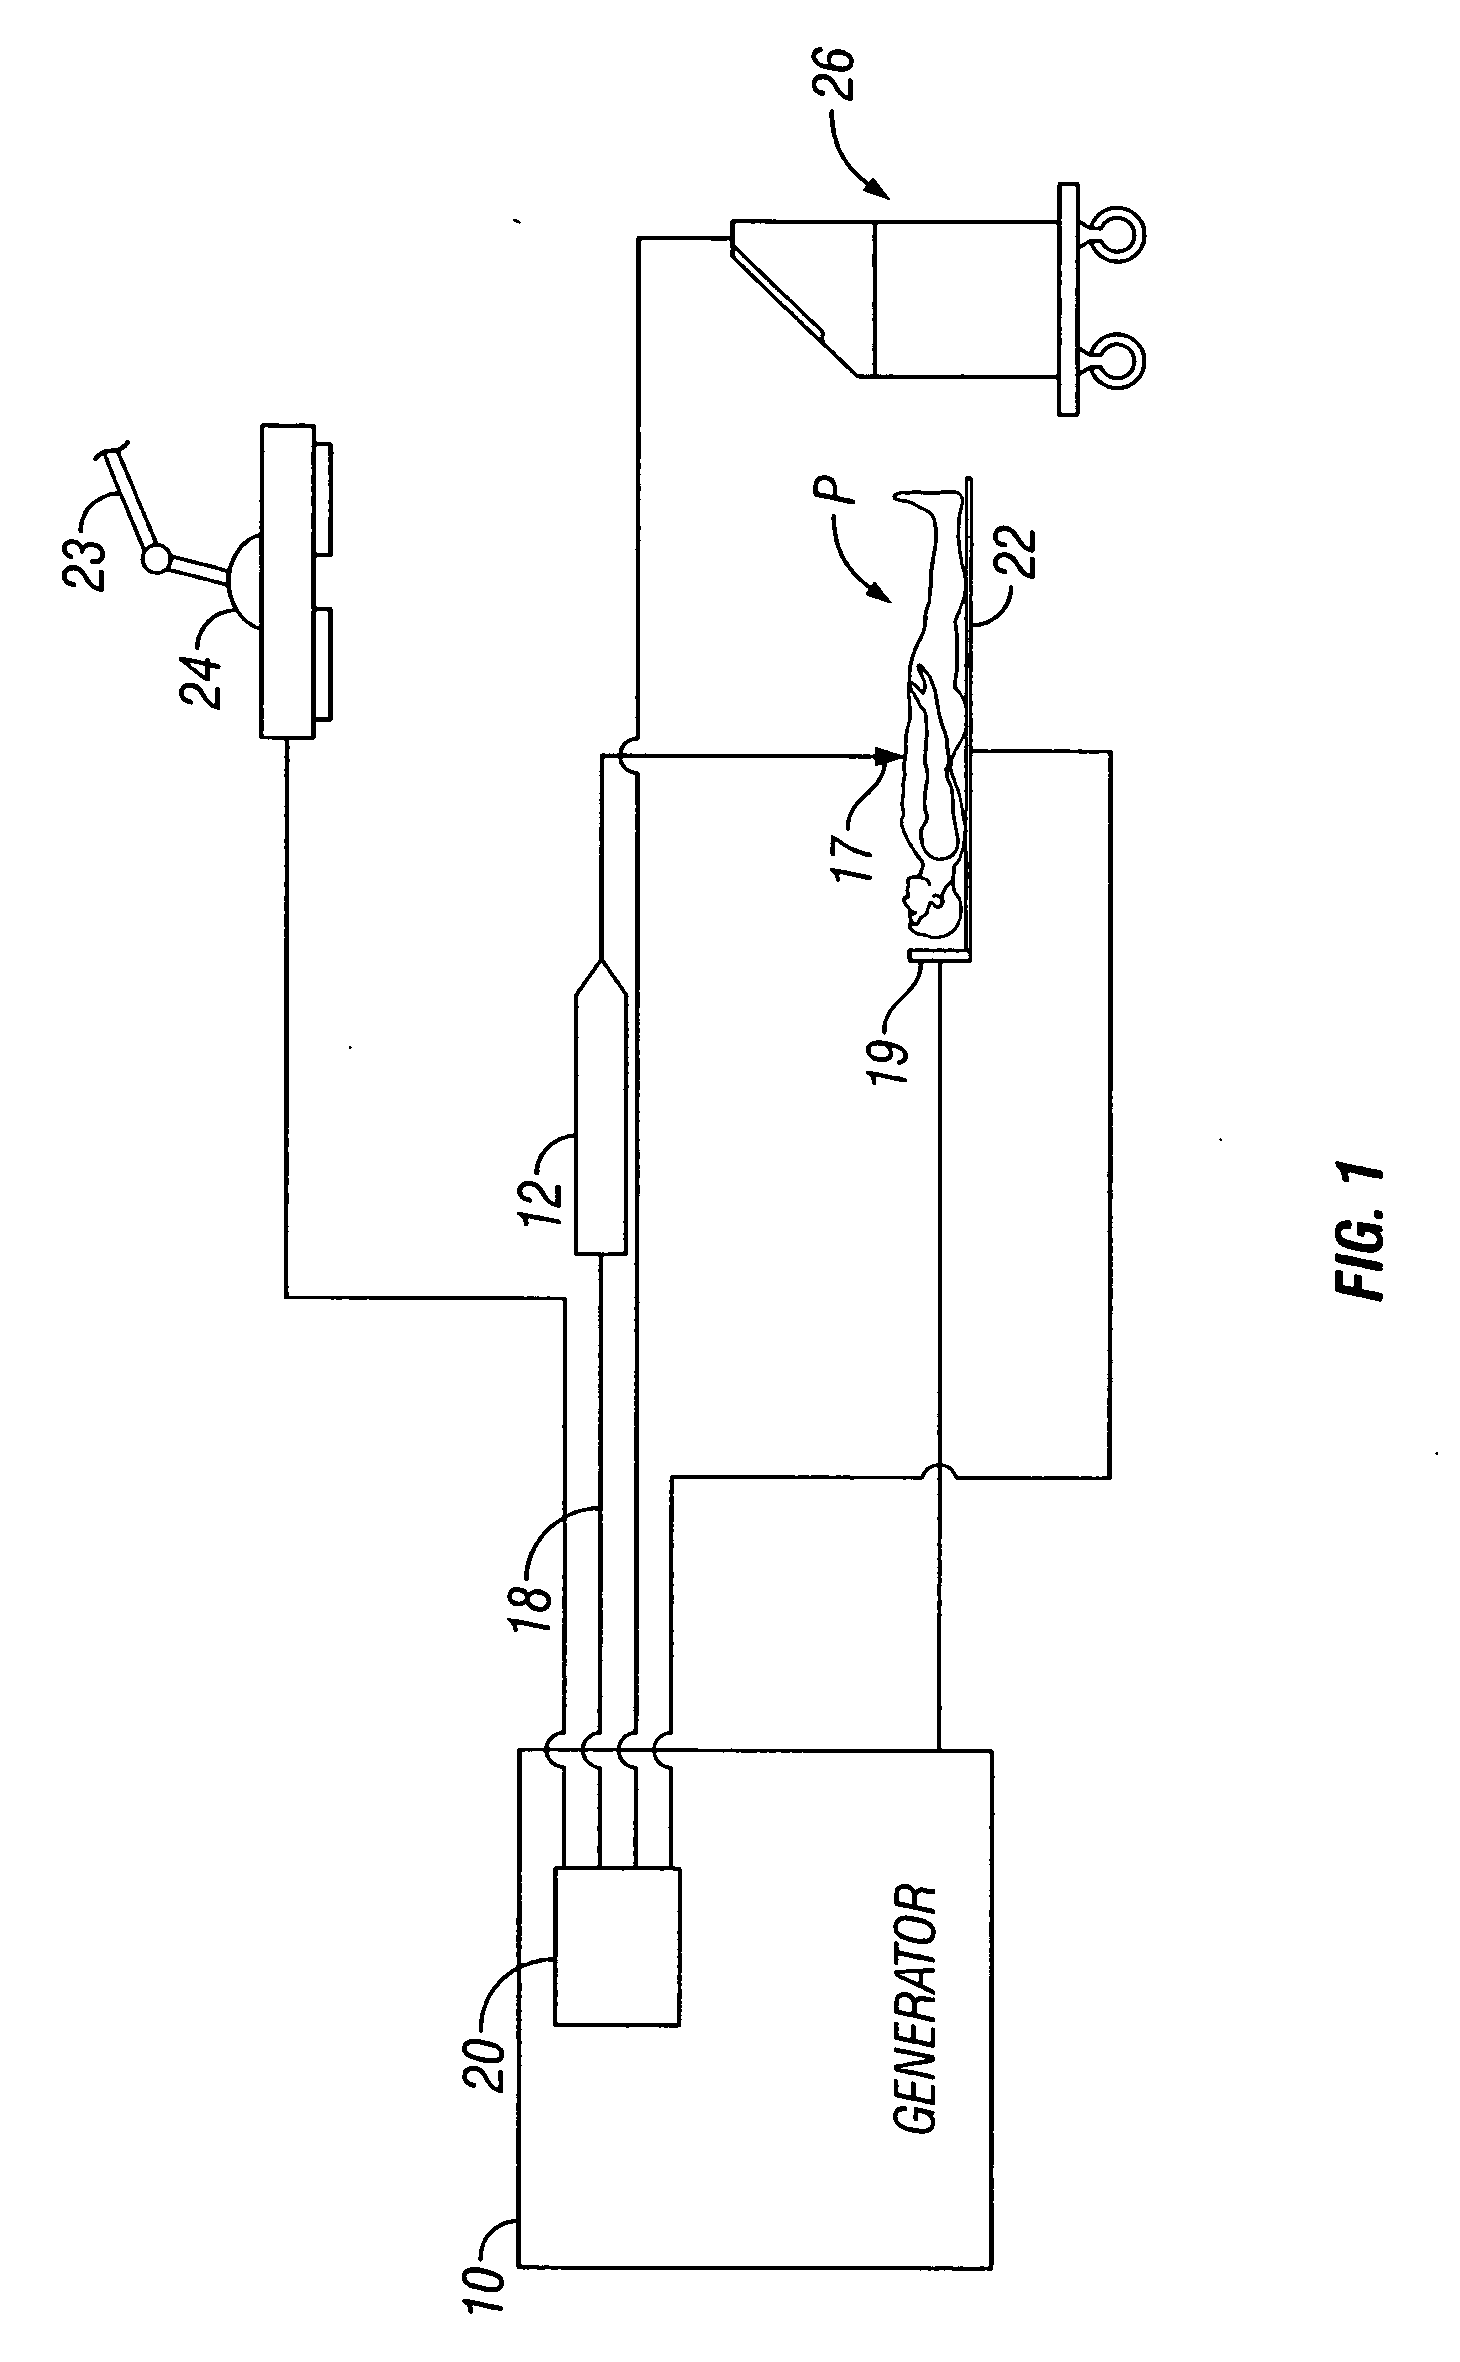 Handheld electrosurgical apparatus for controlling operating room equipment